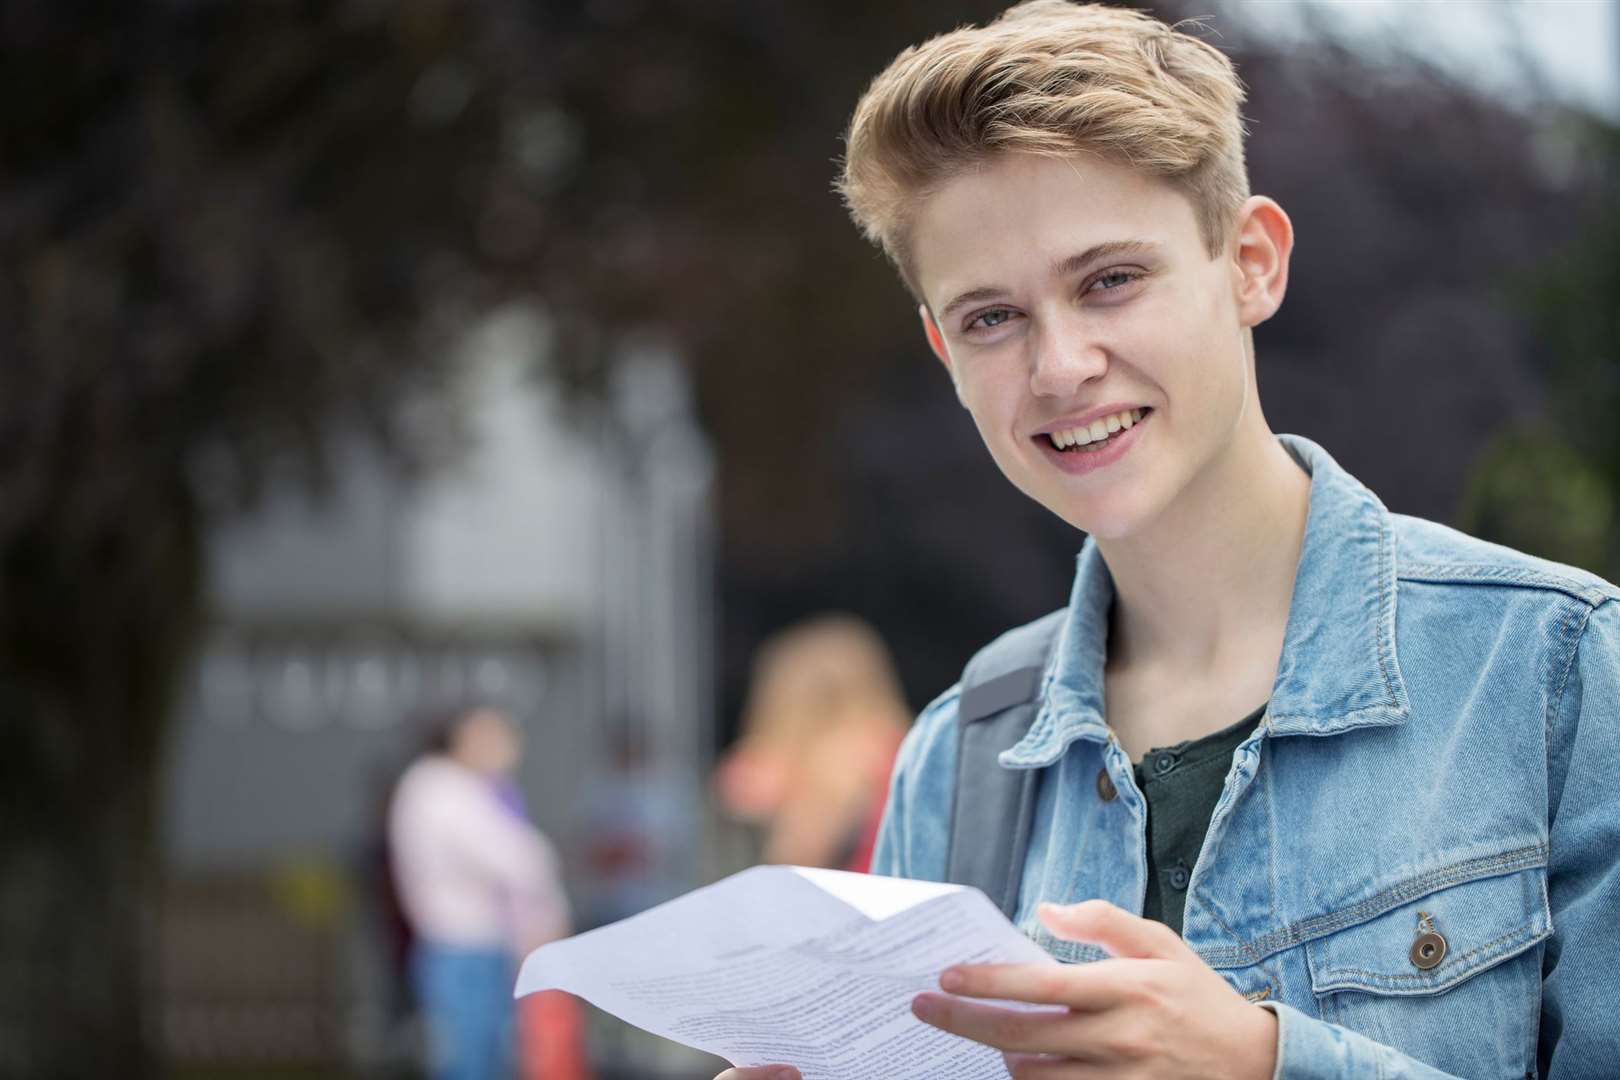 Collecting A-level results is a different experience this year